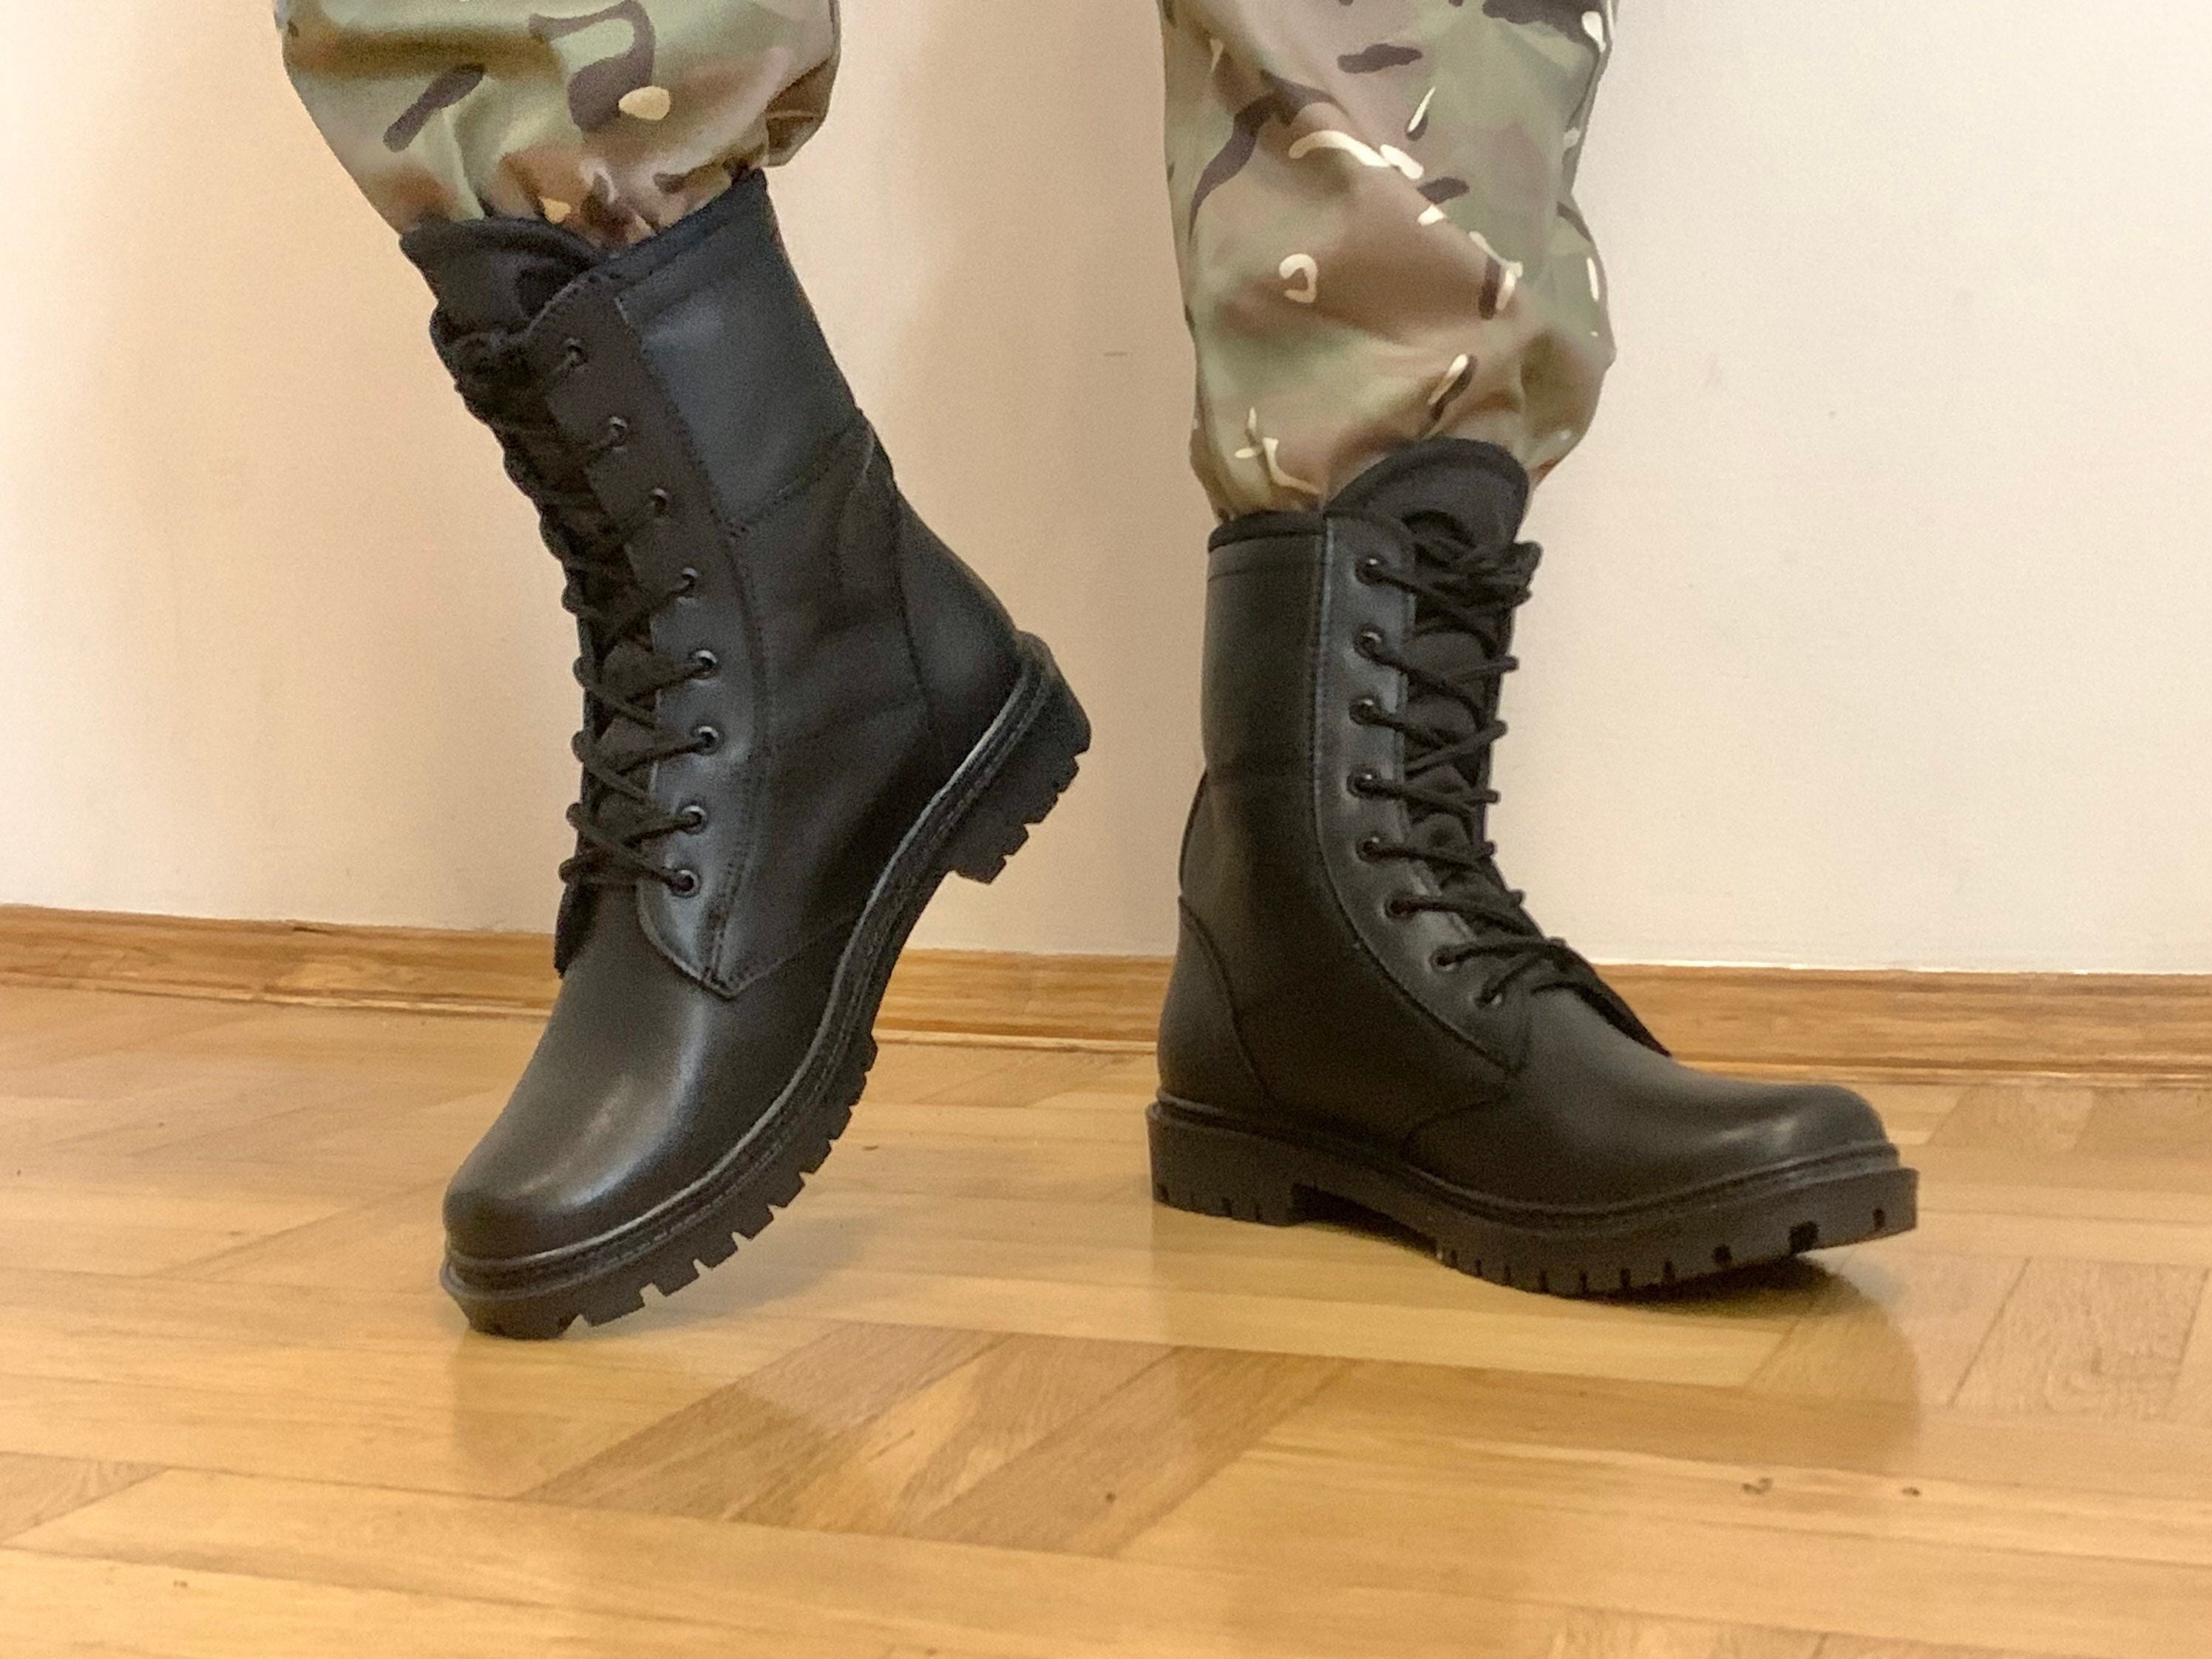 Ukrainian Leather Boots Special Forces Army Military - Etsy